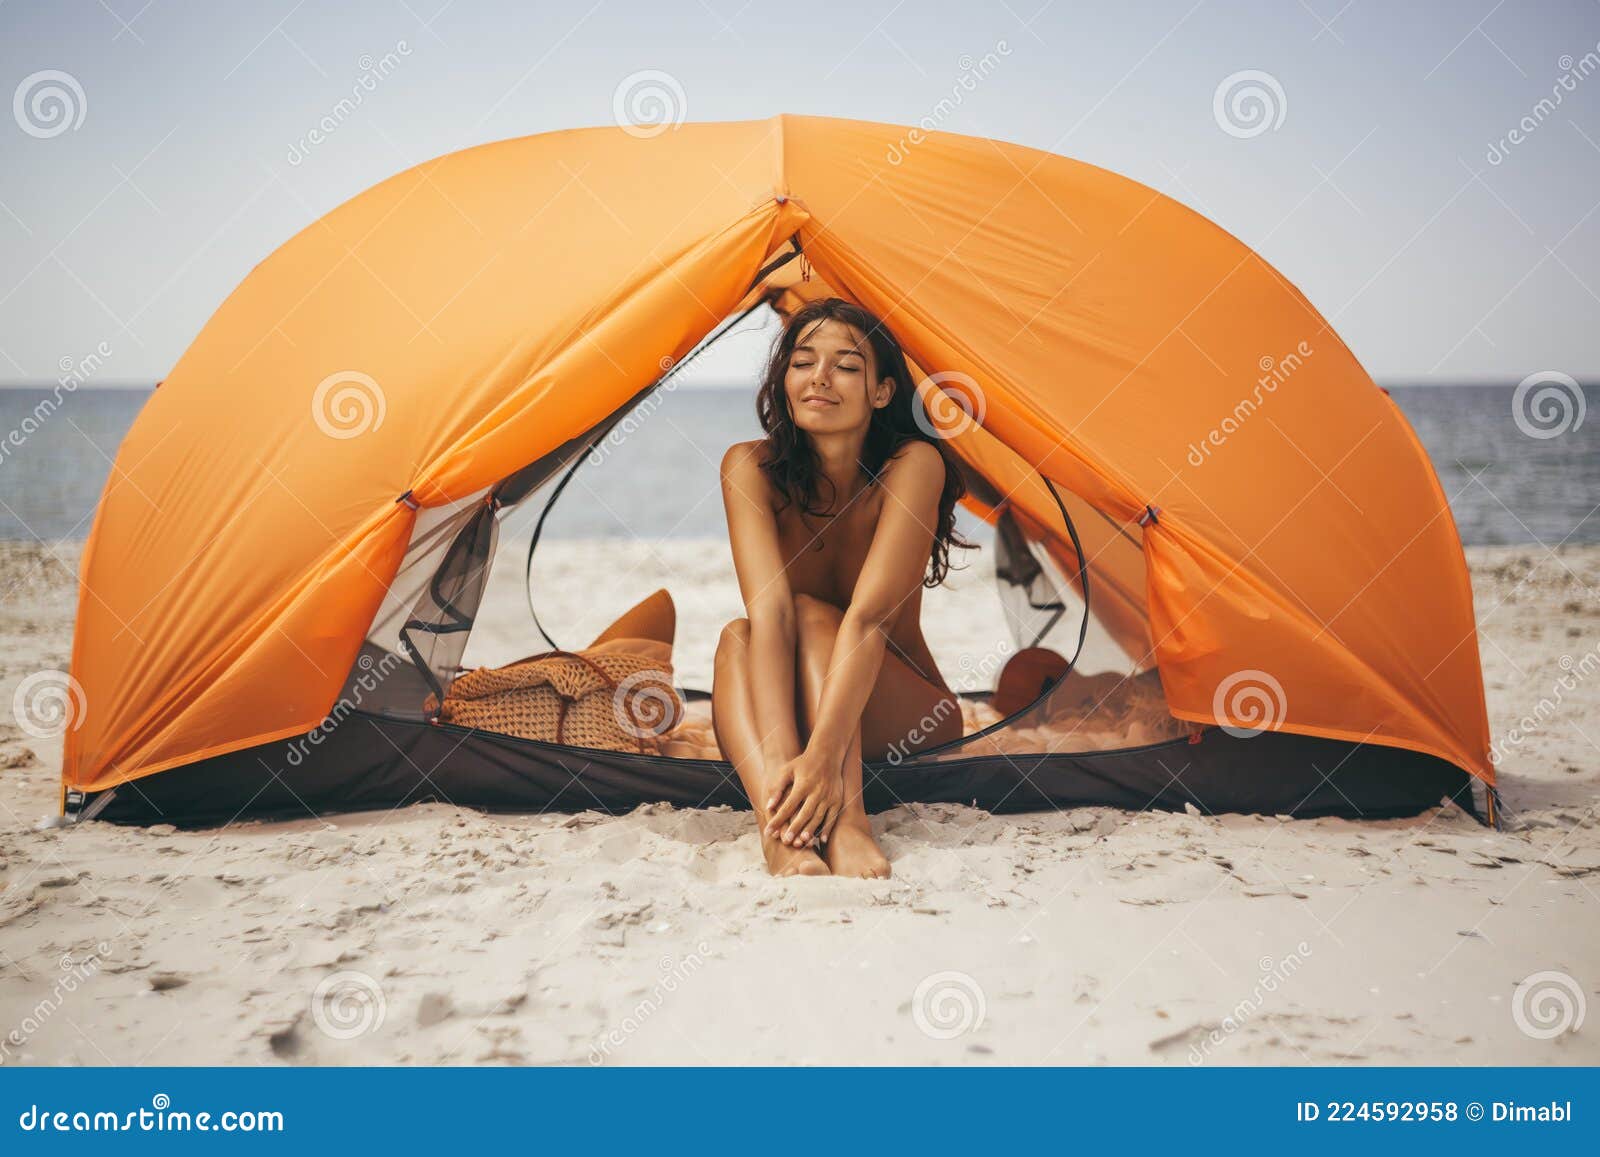 Camping nude